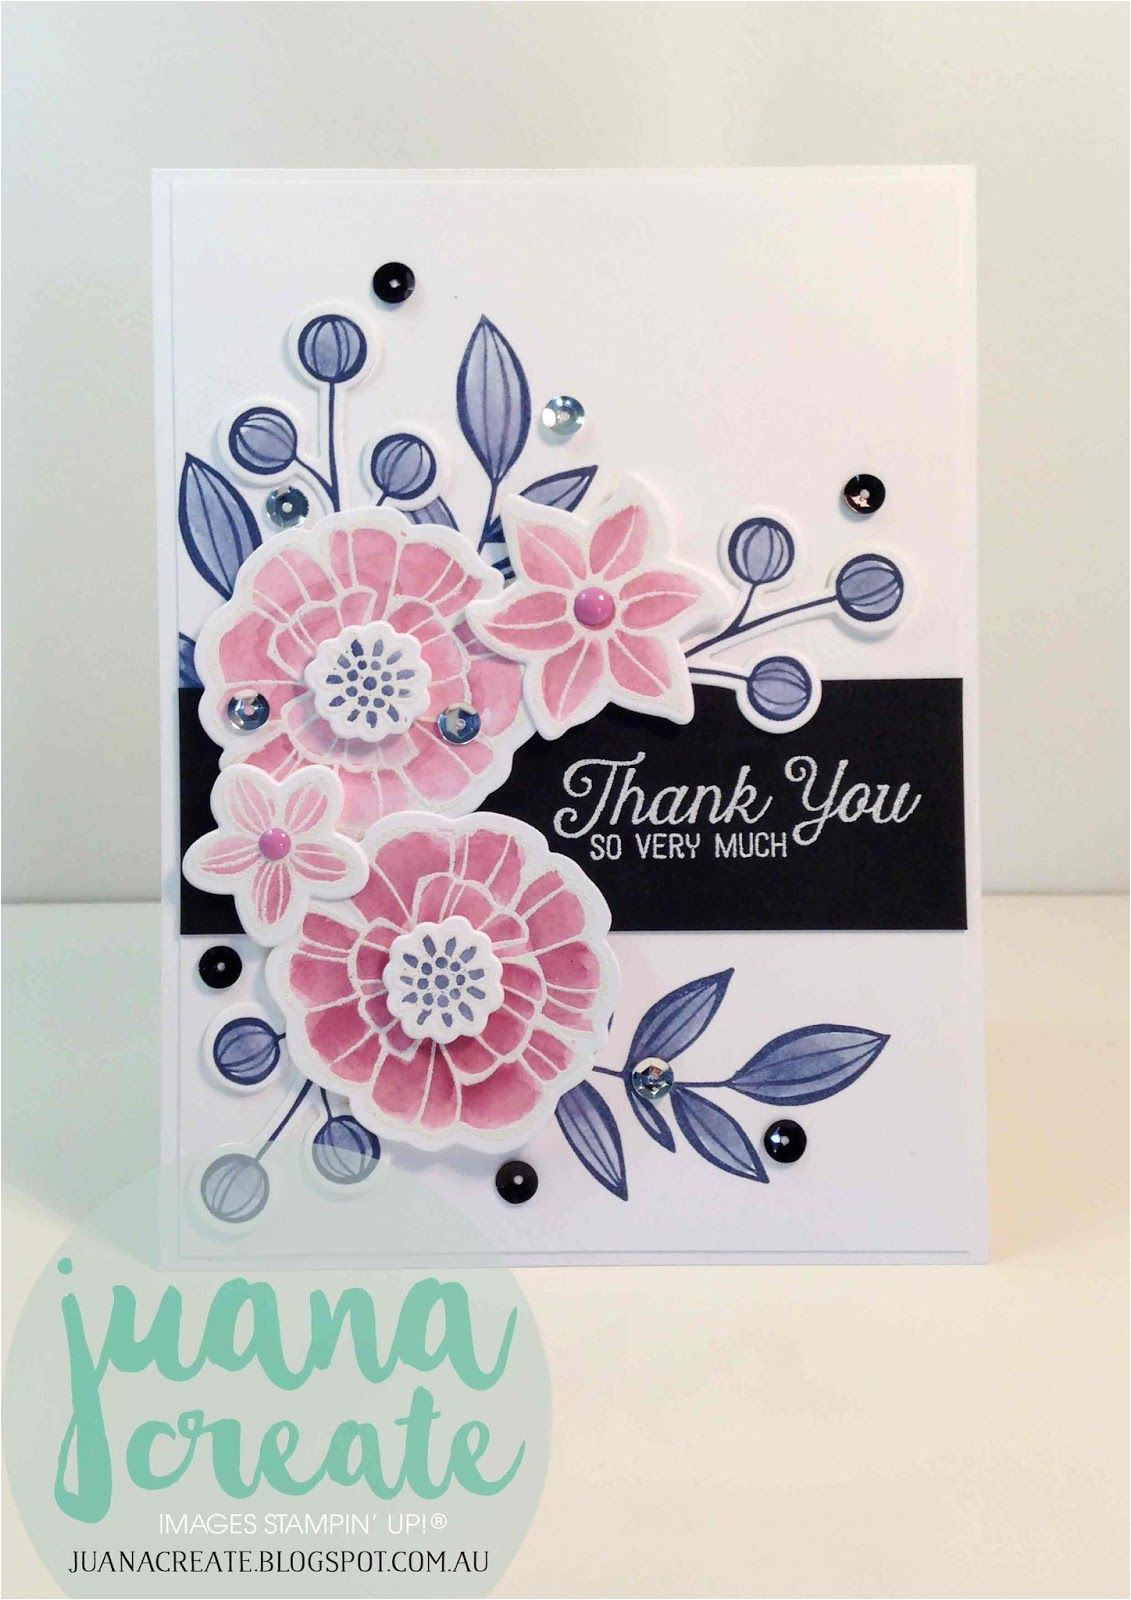 Thank You Very Much Card Falling Flowers Thank You so Very Much with Images